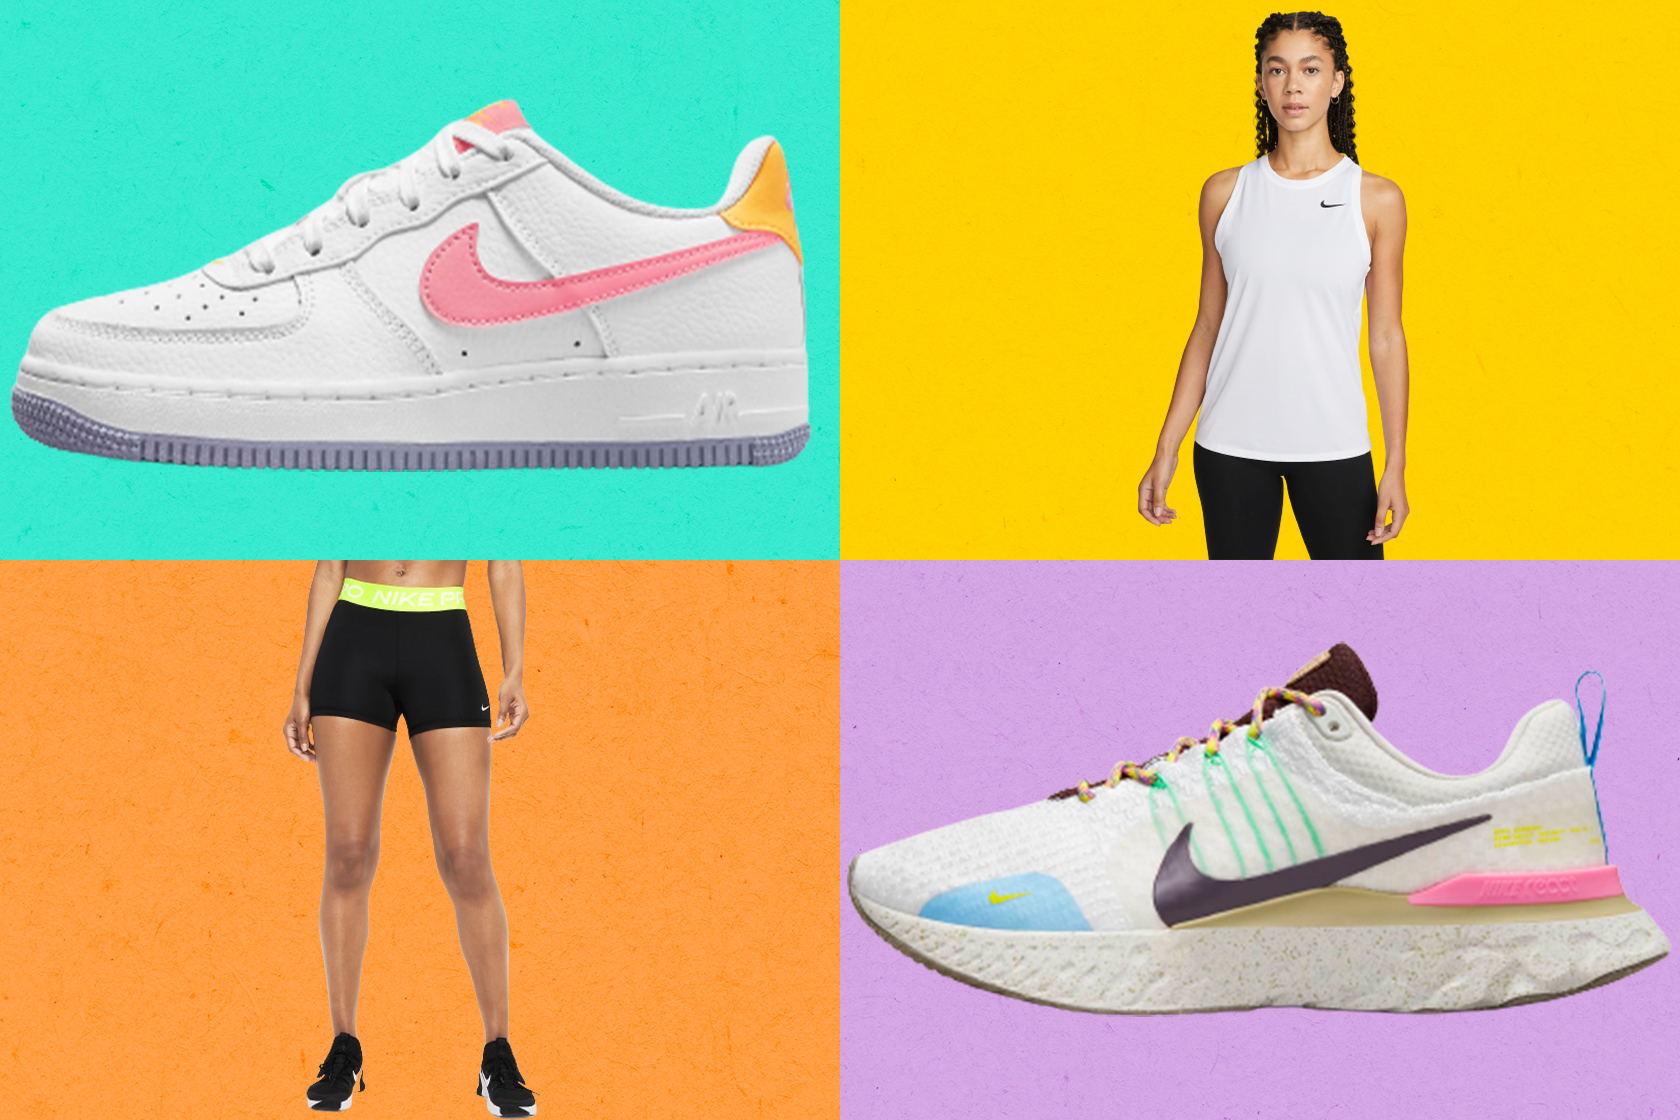 zoo Vaticinador Abuso Nike sale: Save on shoes, tanks, accessories and more this week